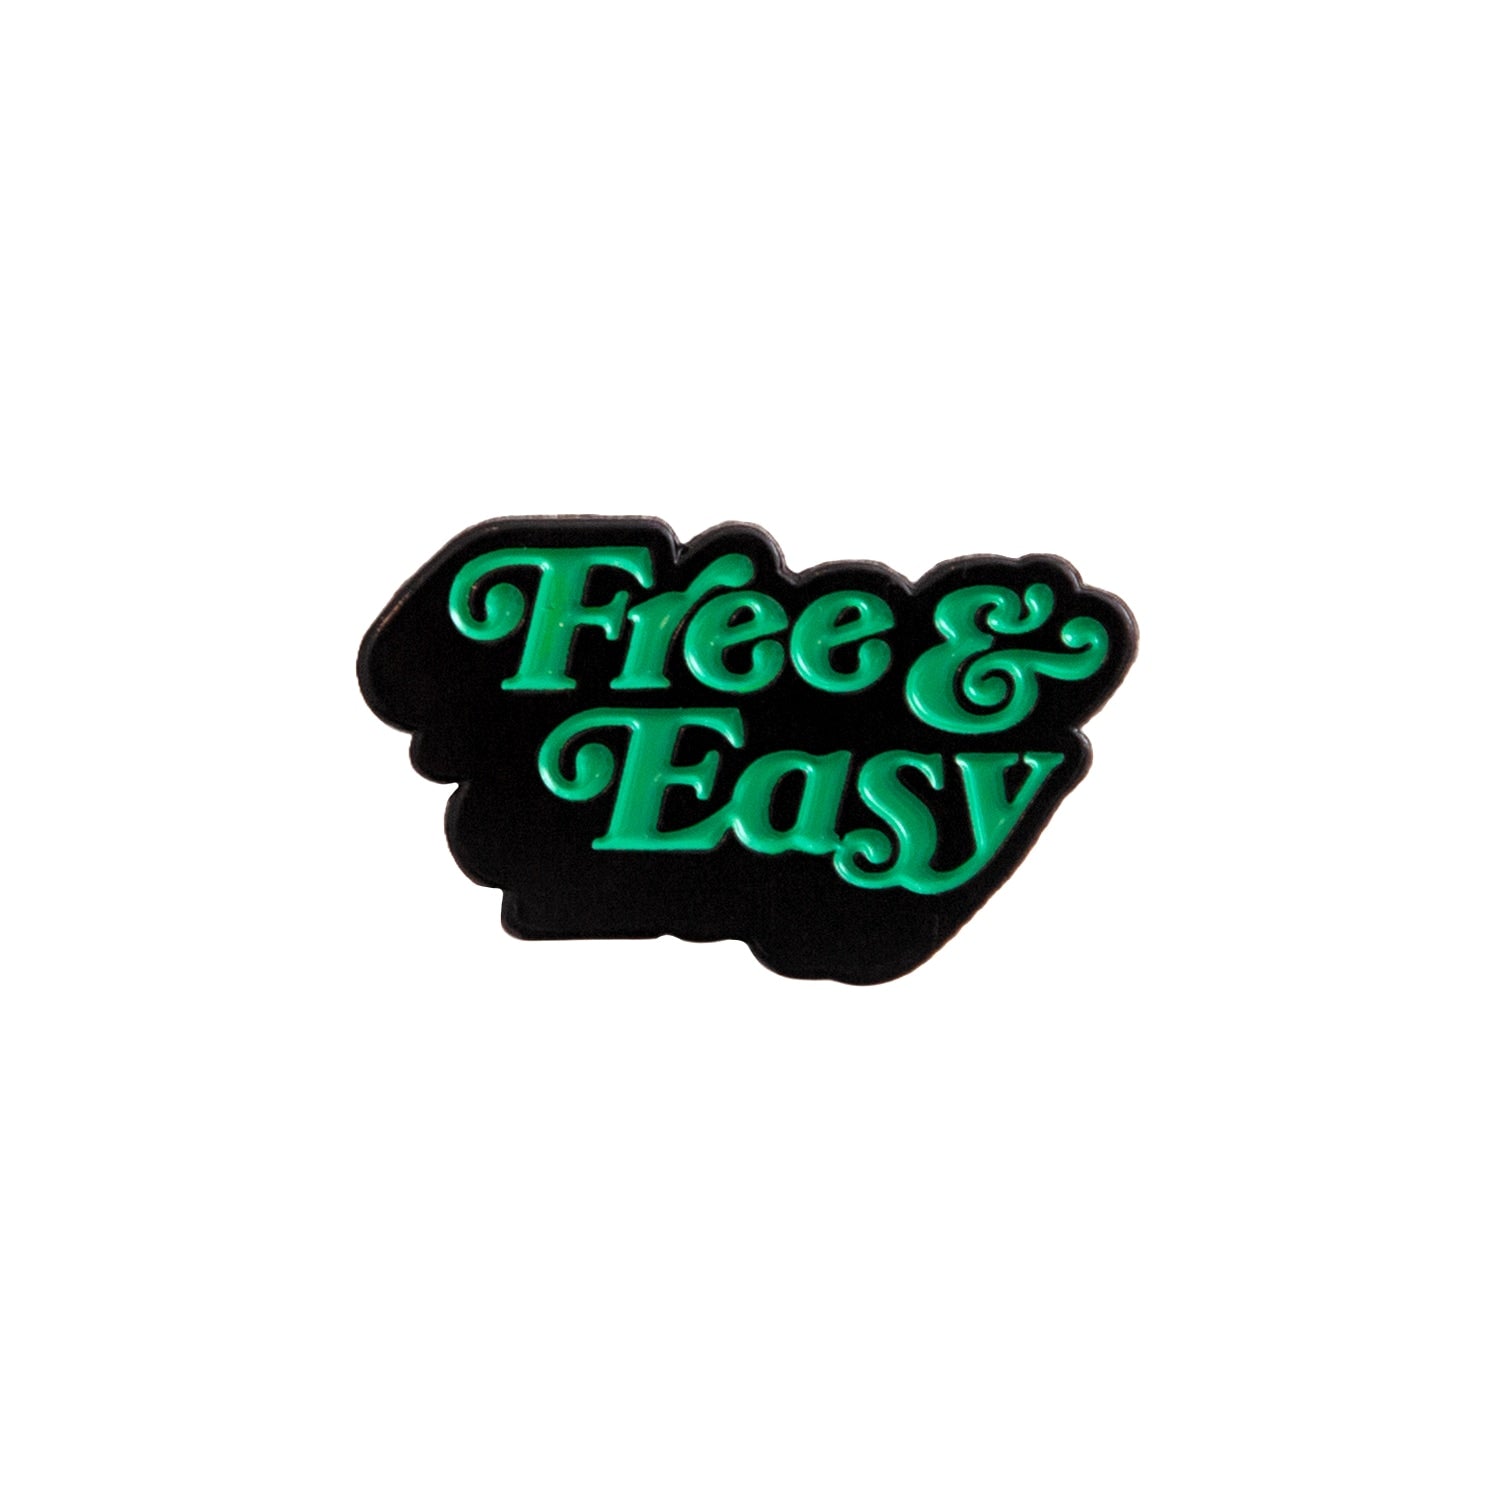 Free & Easy Drop Shadow Enamel Pin in green and black